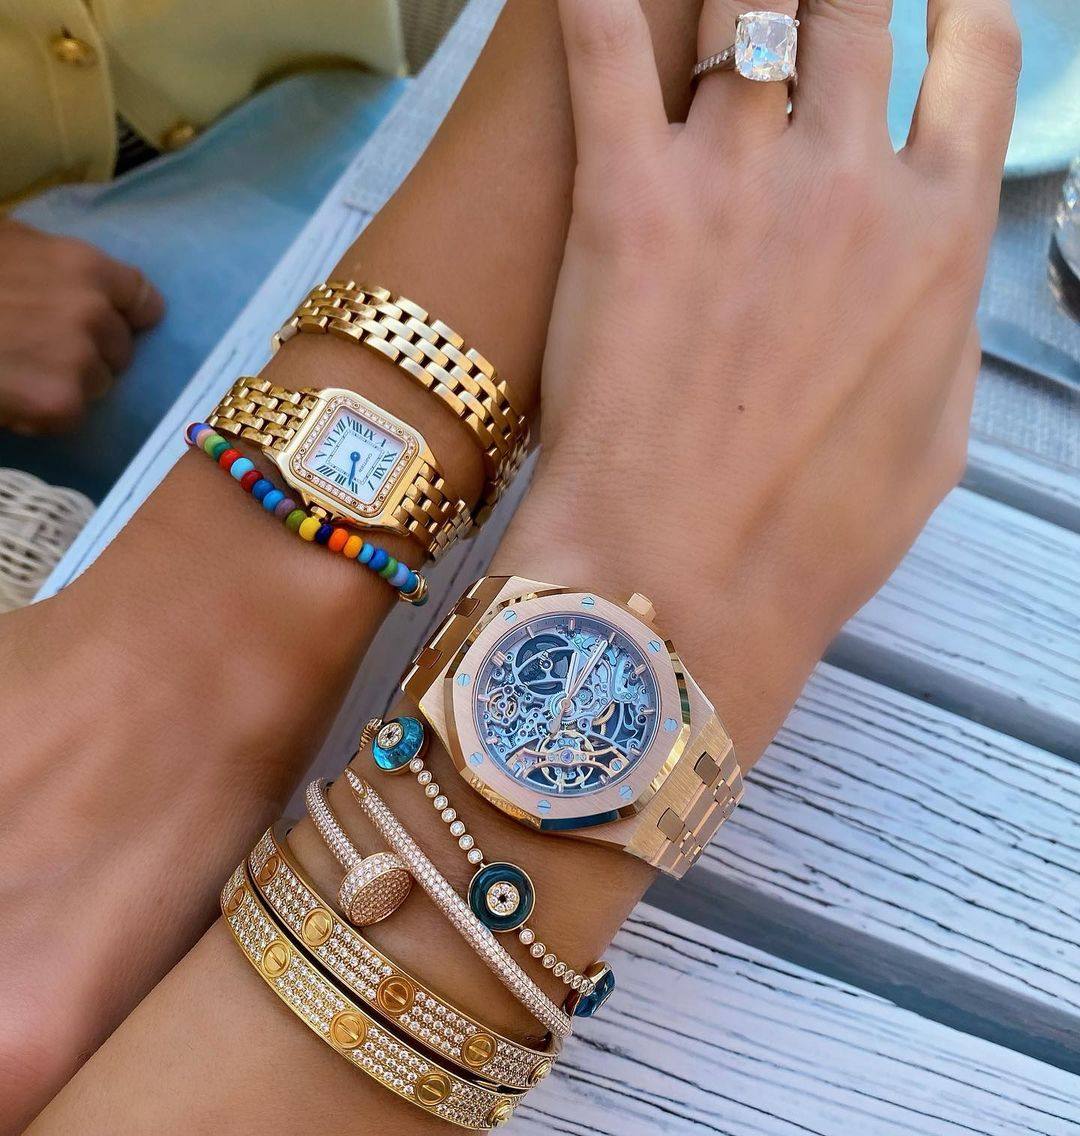 Female watch collectors are breaking down gender barriers. Photo: @watch_fashionista/Instagram